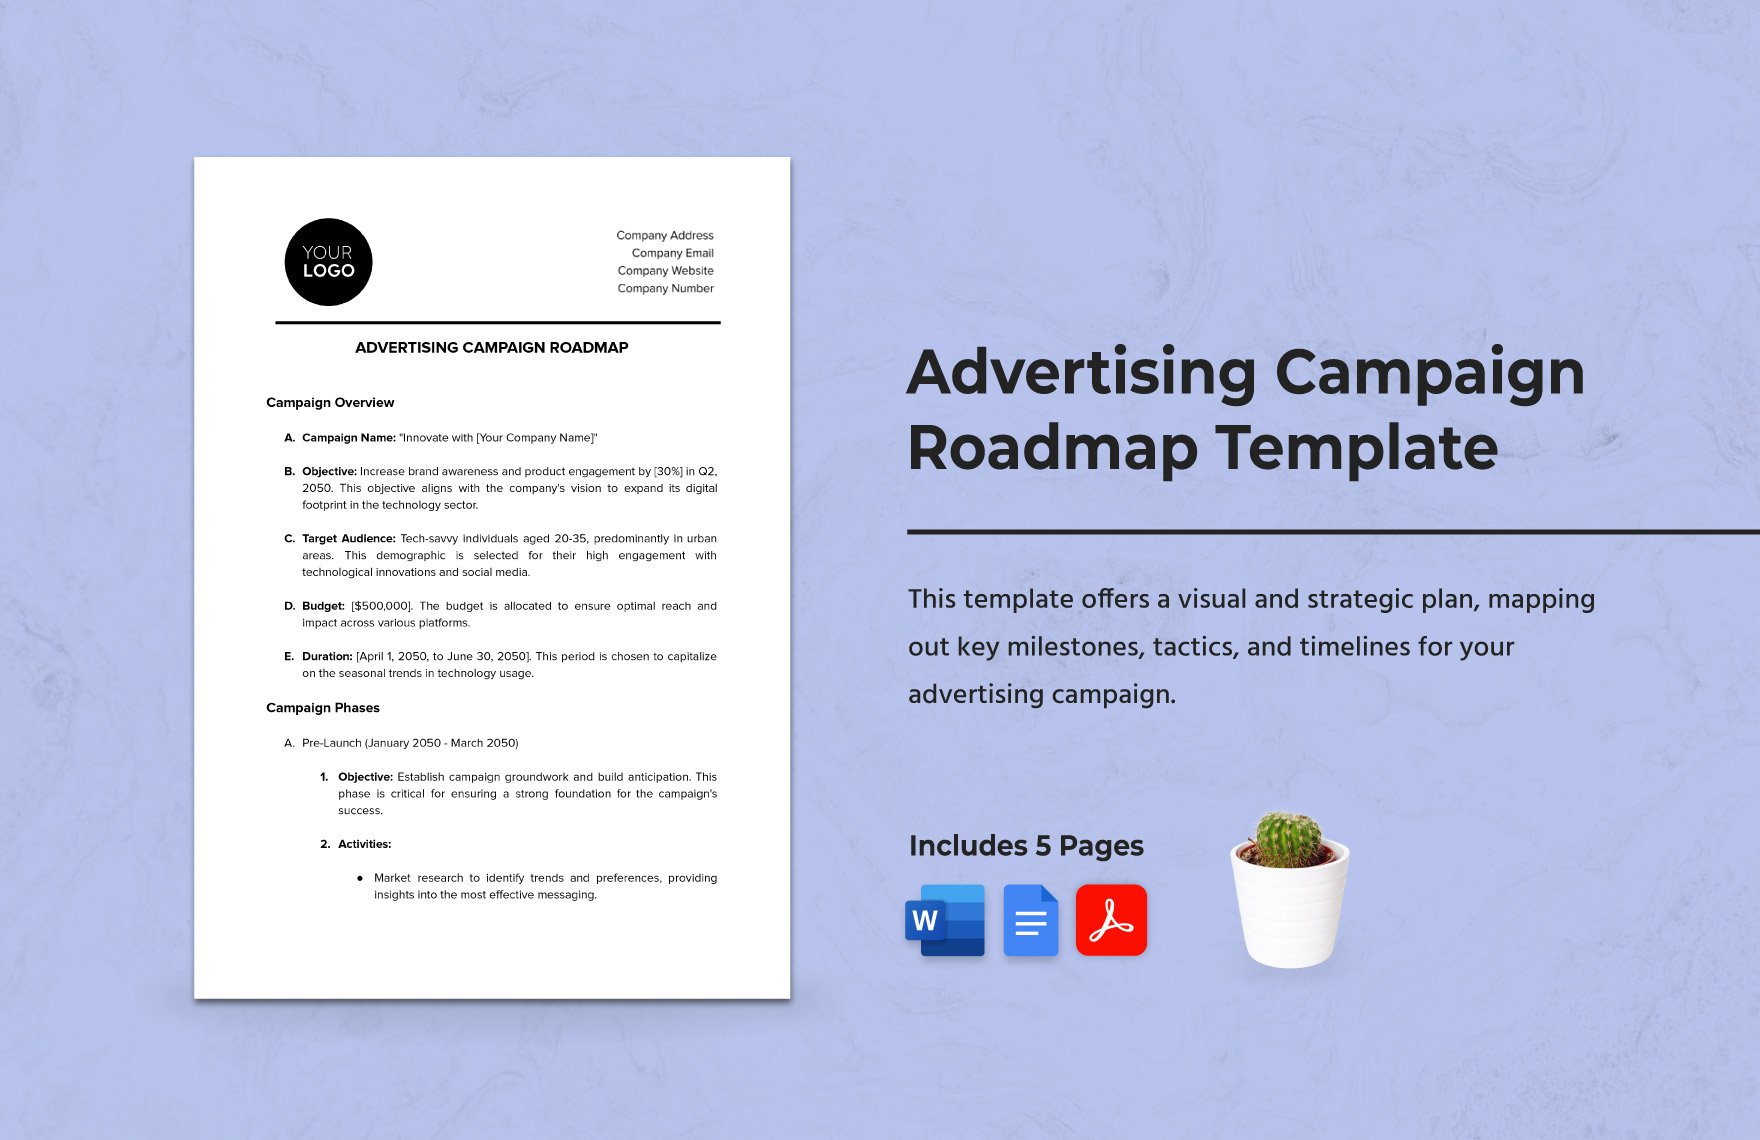 Advertising Campaign Roadmap Template in Word, Google Docs, PDF